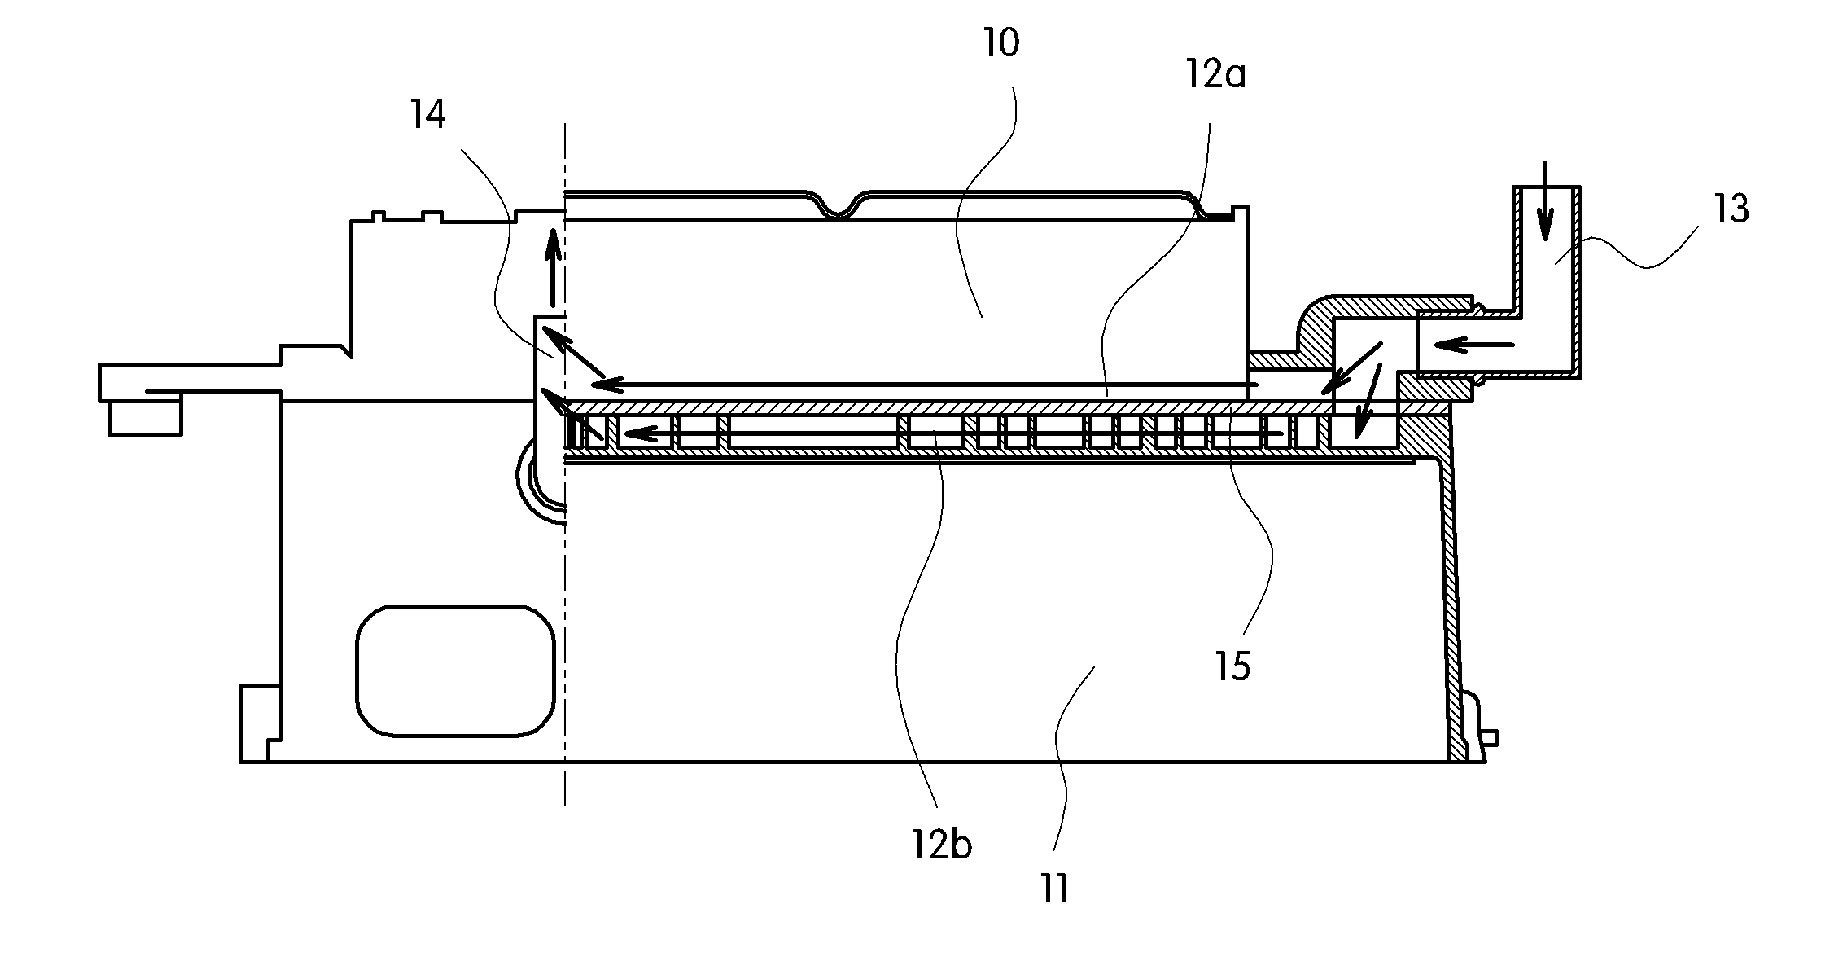 Cooling apparatus for electric modules of hybrid electric vehicle or electric vehicle